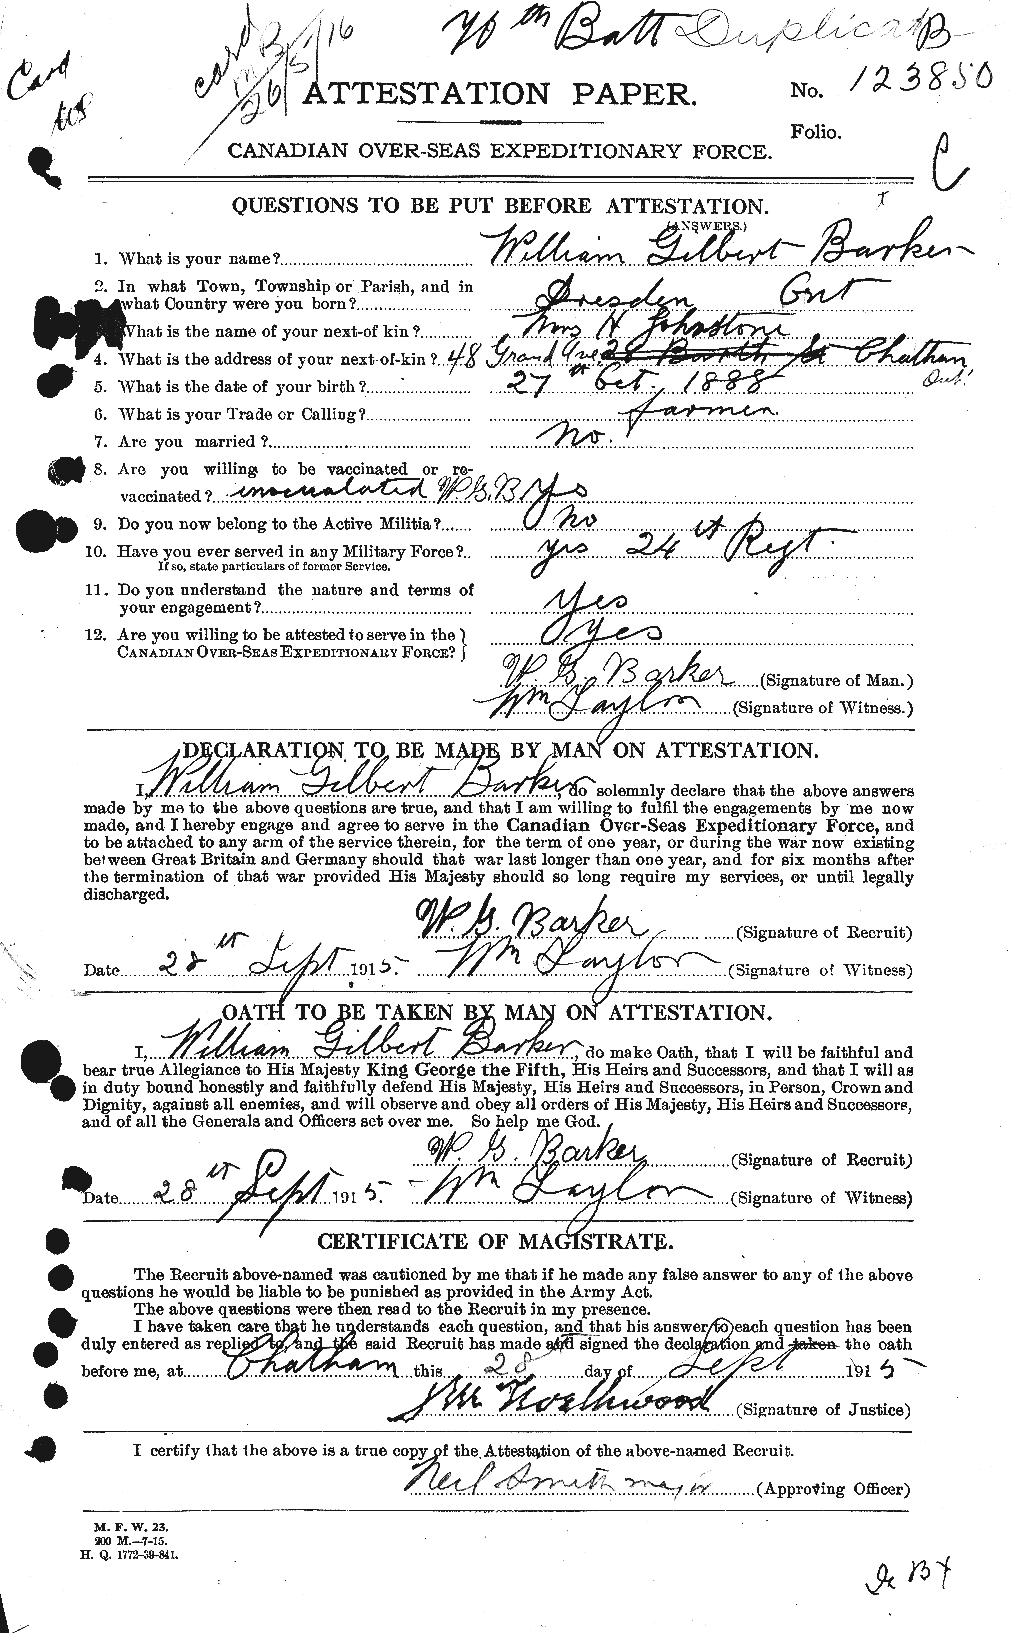 Personnel Records of the First World War - CEF 226899a